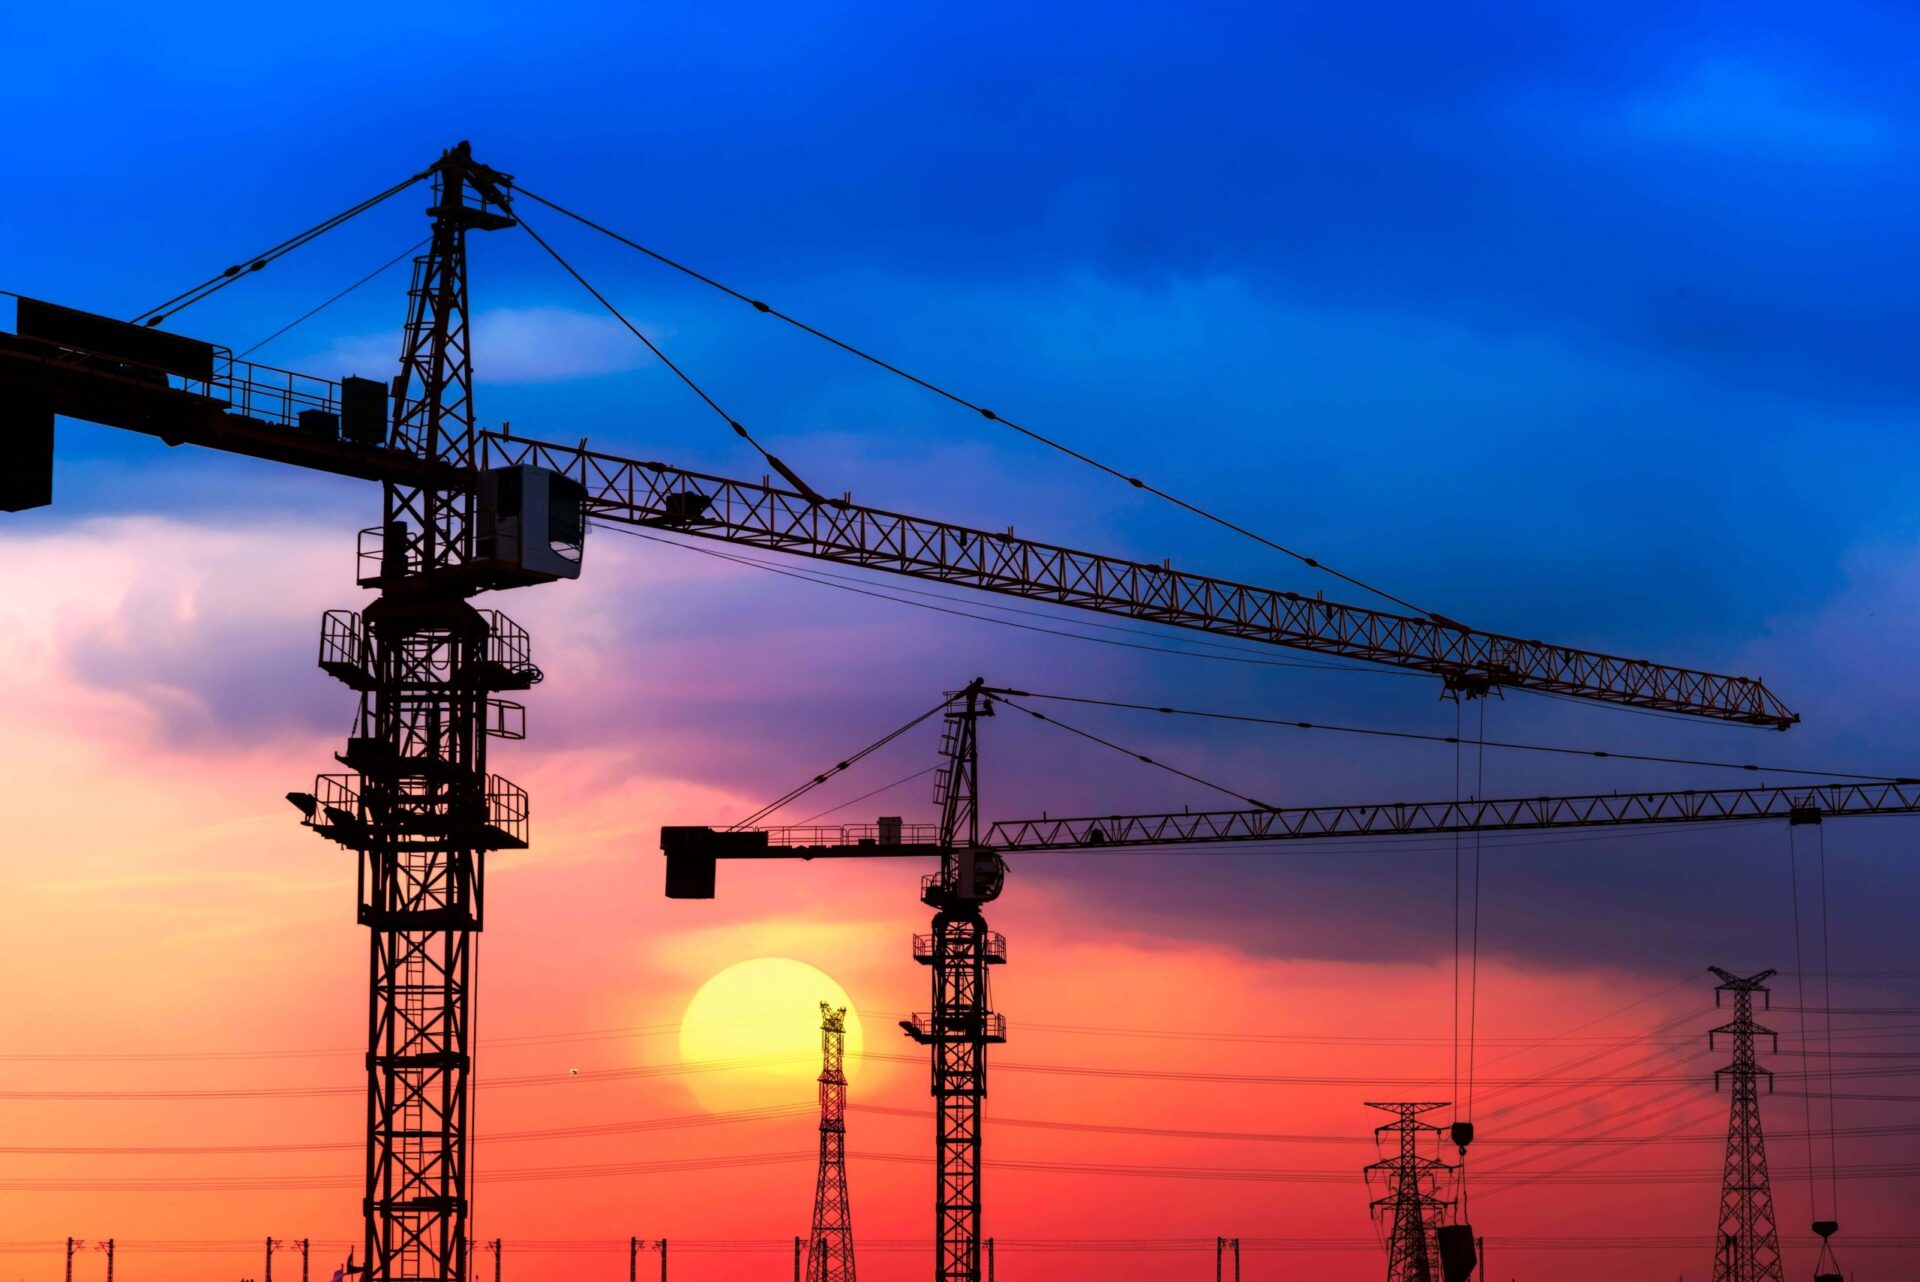 Industrial construction cranes and building silhouettes over sun